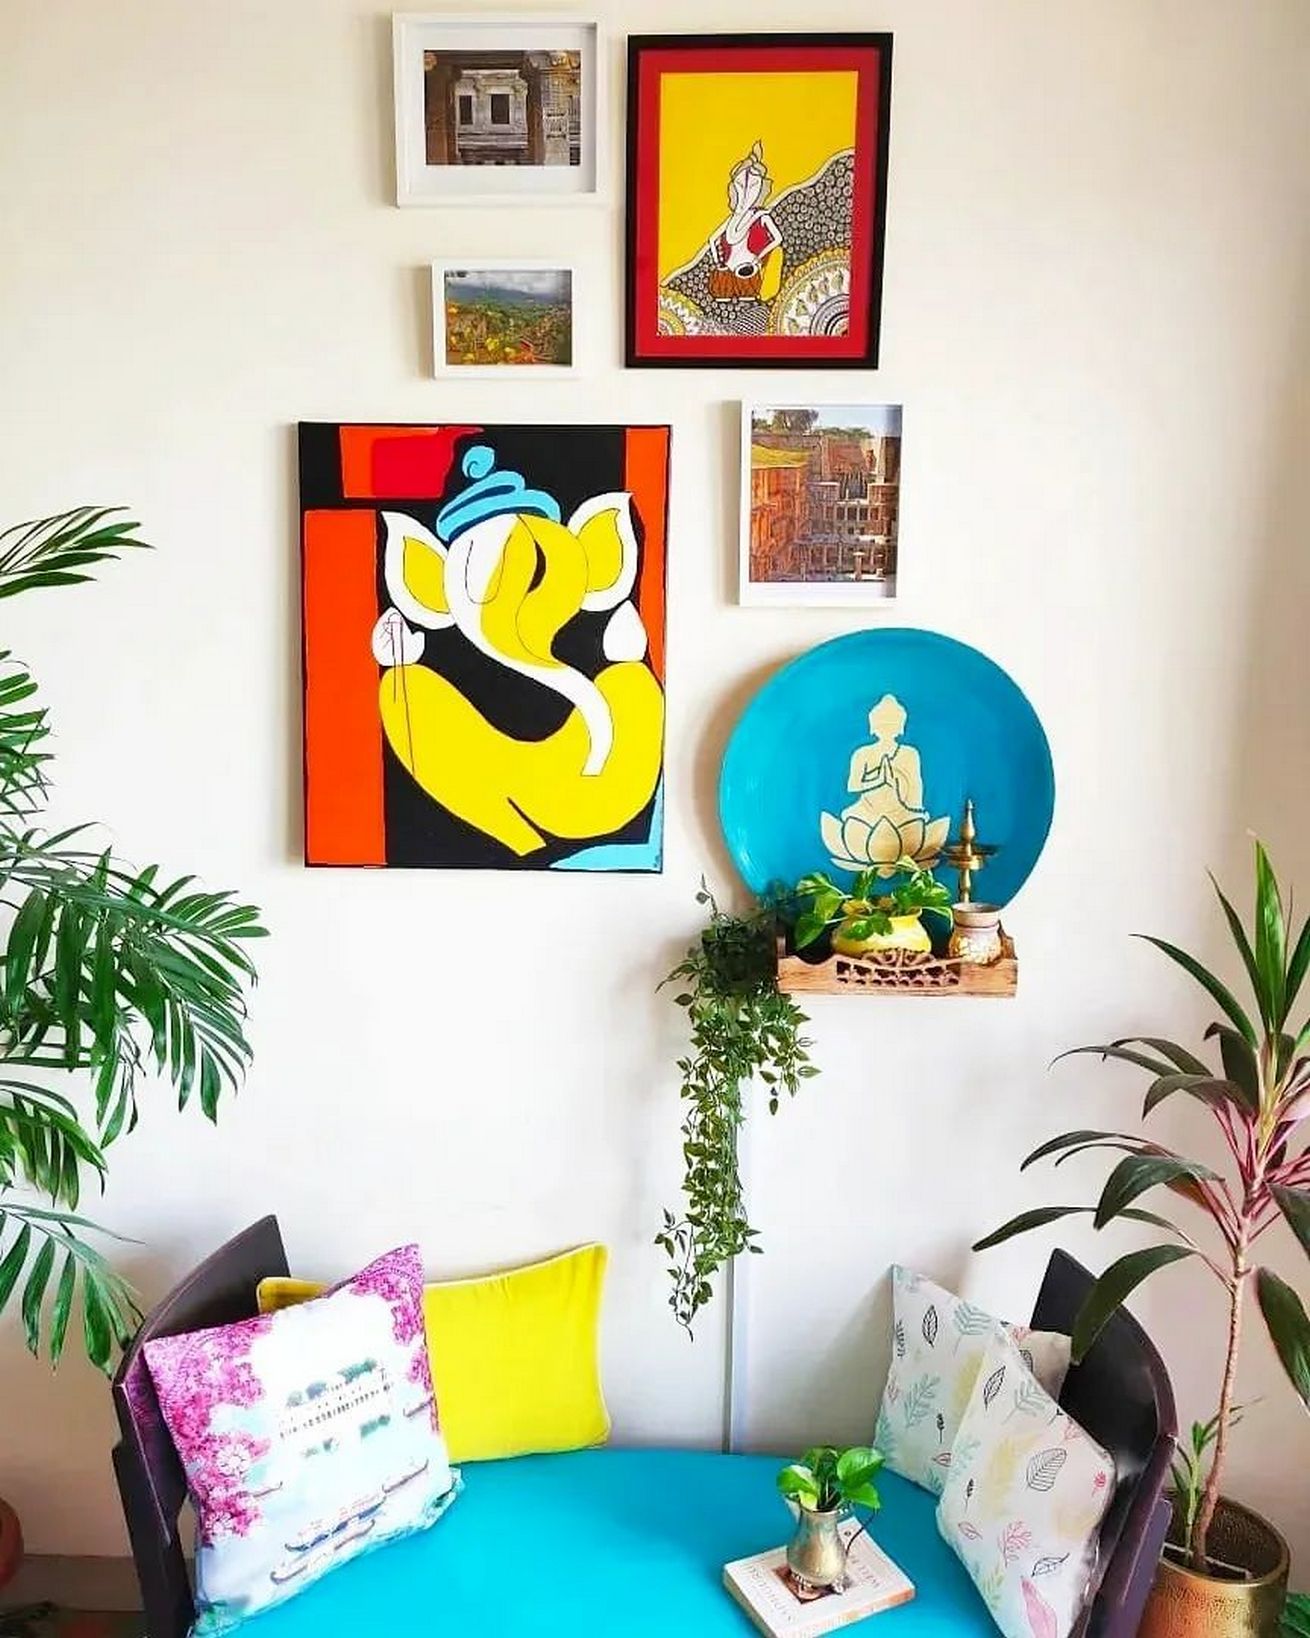 DIY Wall Decor Ideas to Instantly Upgrade Can Easily